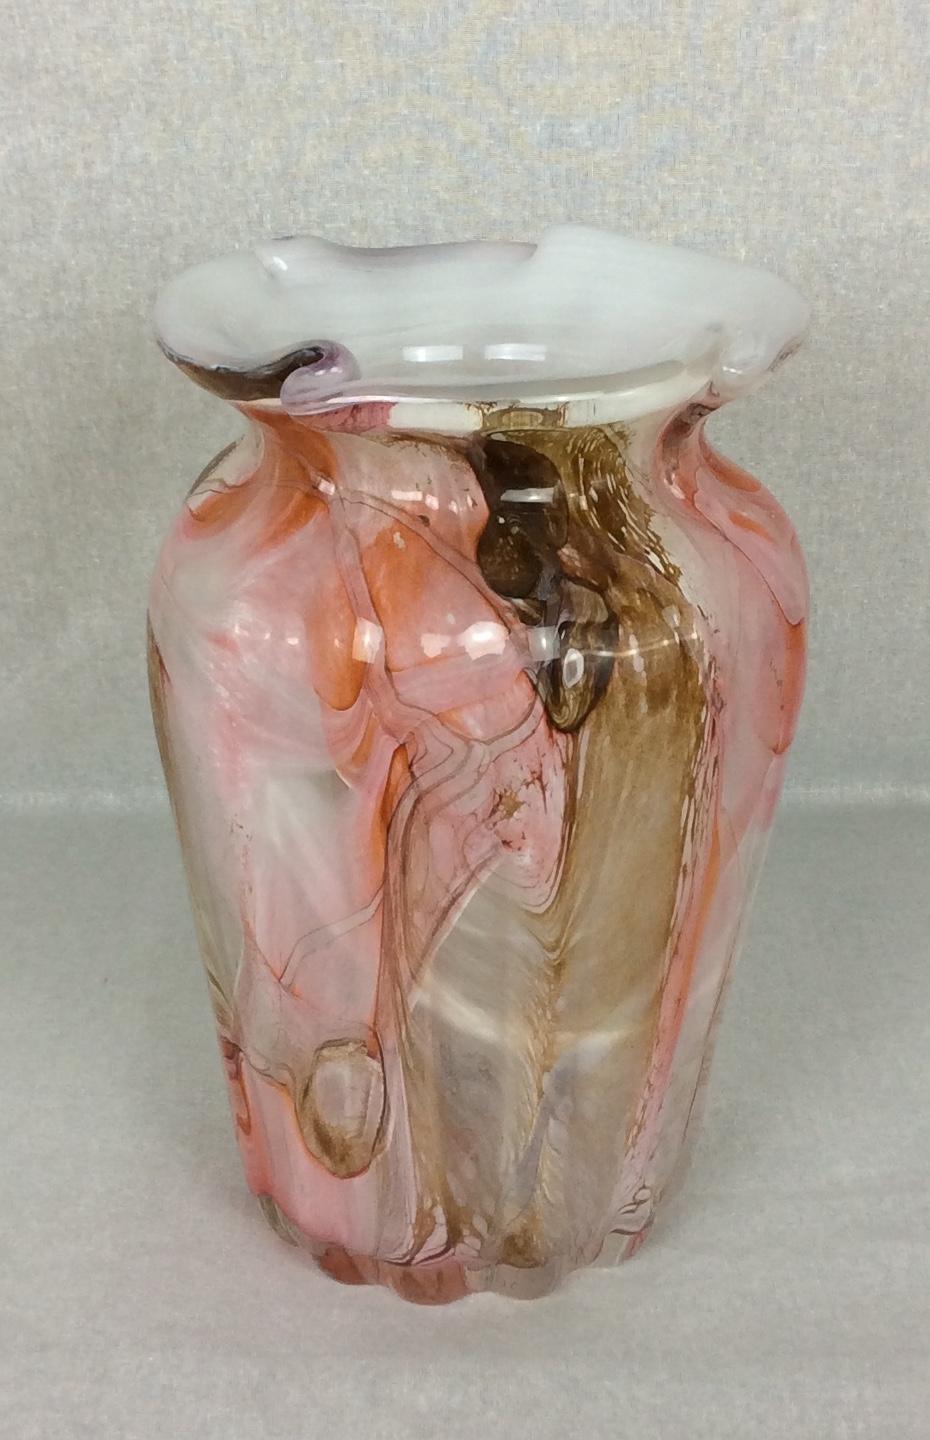 Beautiful Fratelli Toso Murano handblown Italian art glass sculptural flower vase. The piece has pulled glass pieces throughout the body, with very vivid colors. 

A beautiful collectors item. Measures 9 7/8